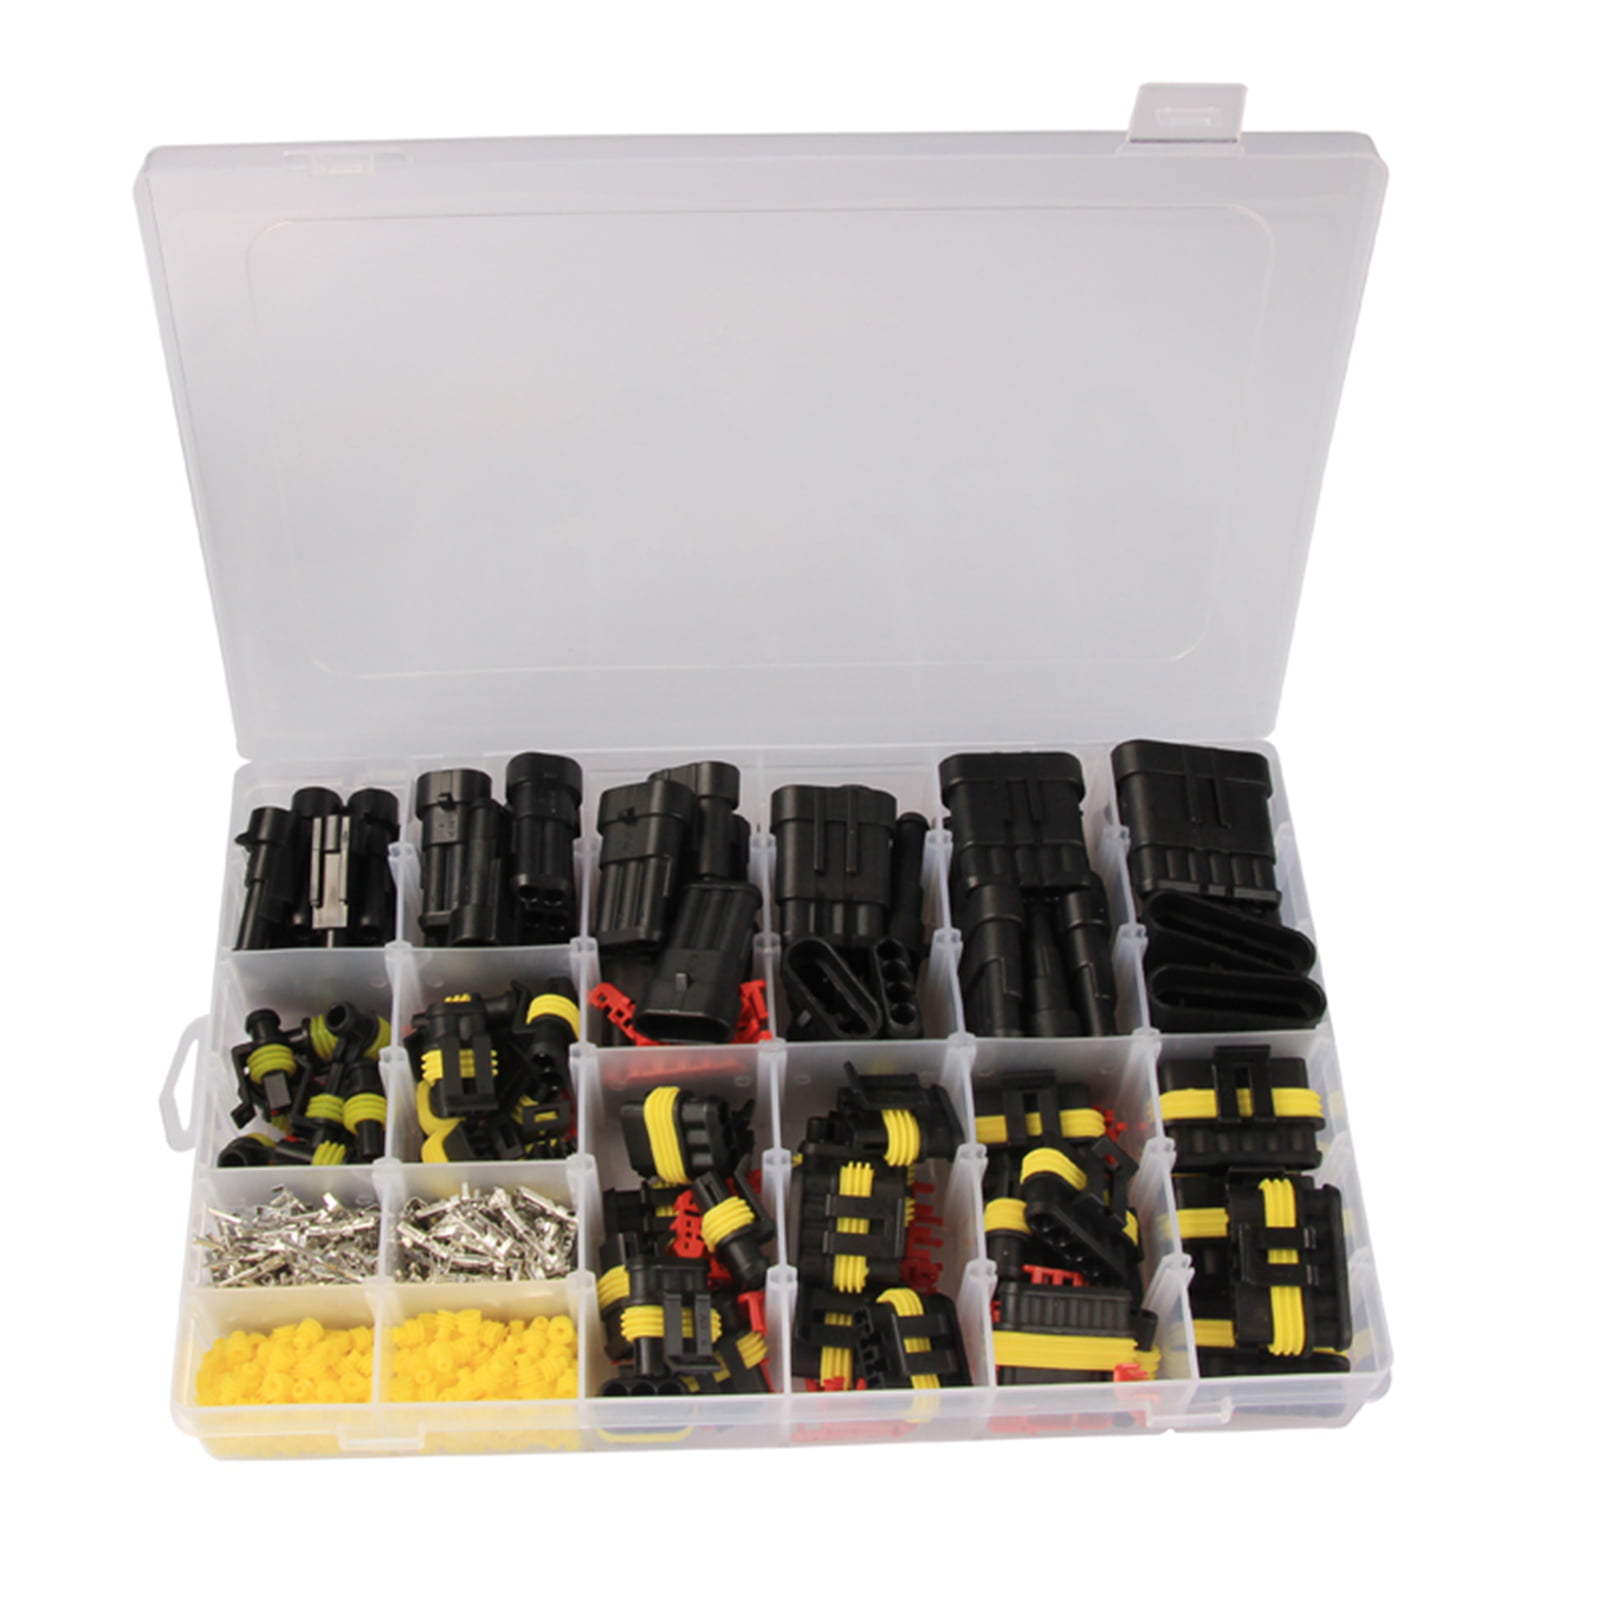 NEW Automotive Electrical Wire Connectors Kit 2 3 4 6 Pin Cable Terminal Plug UK 